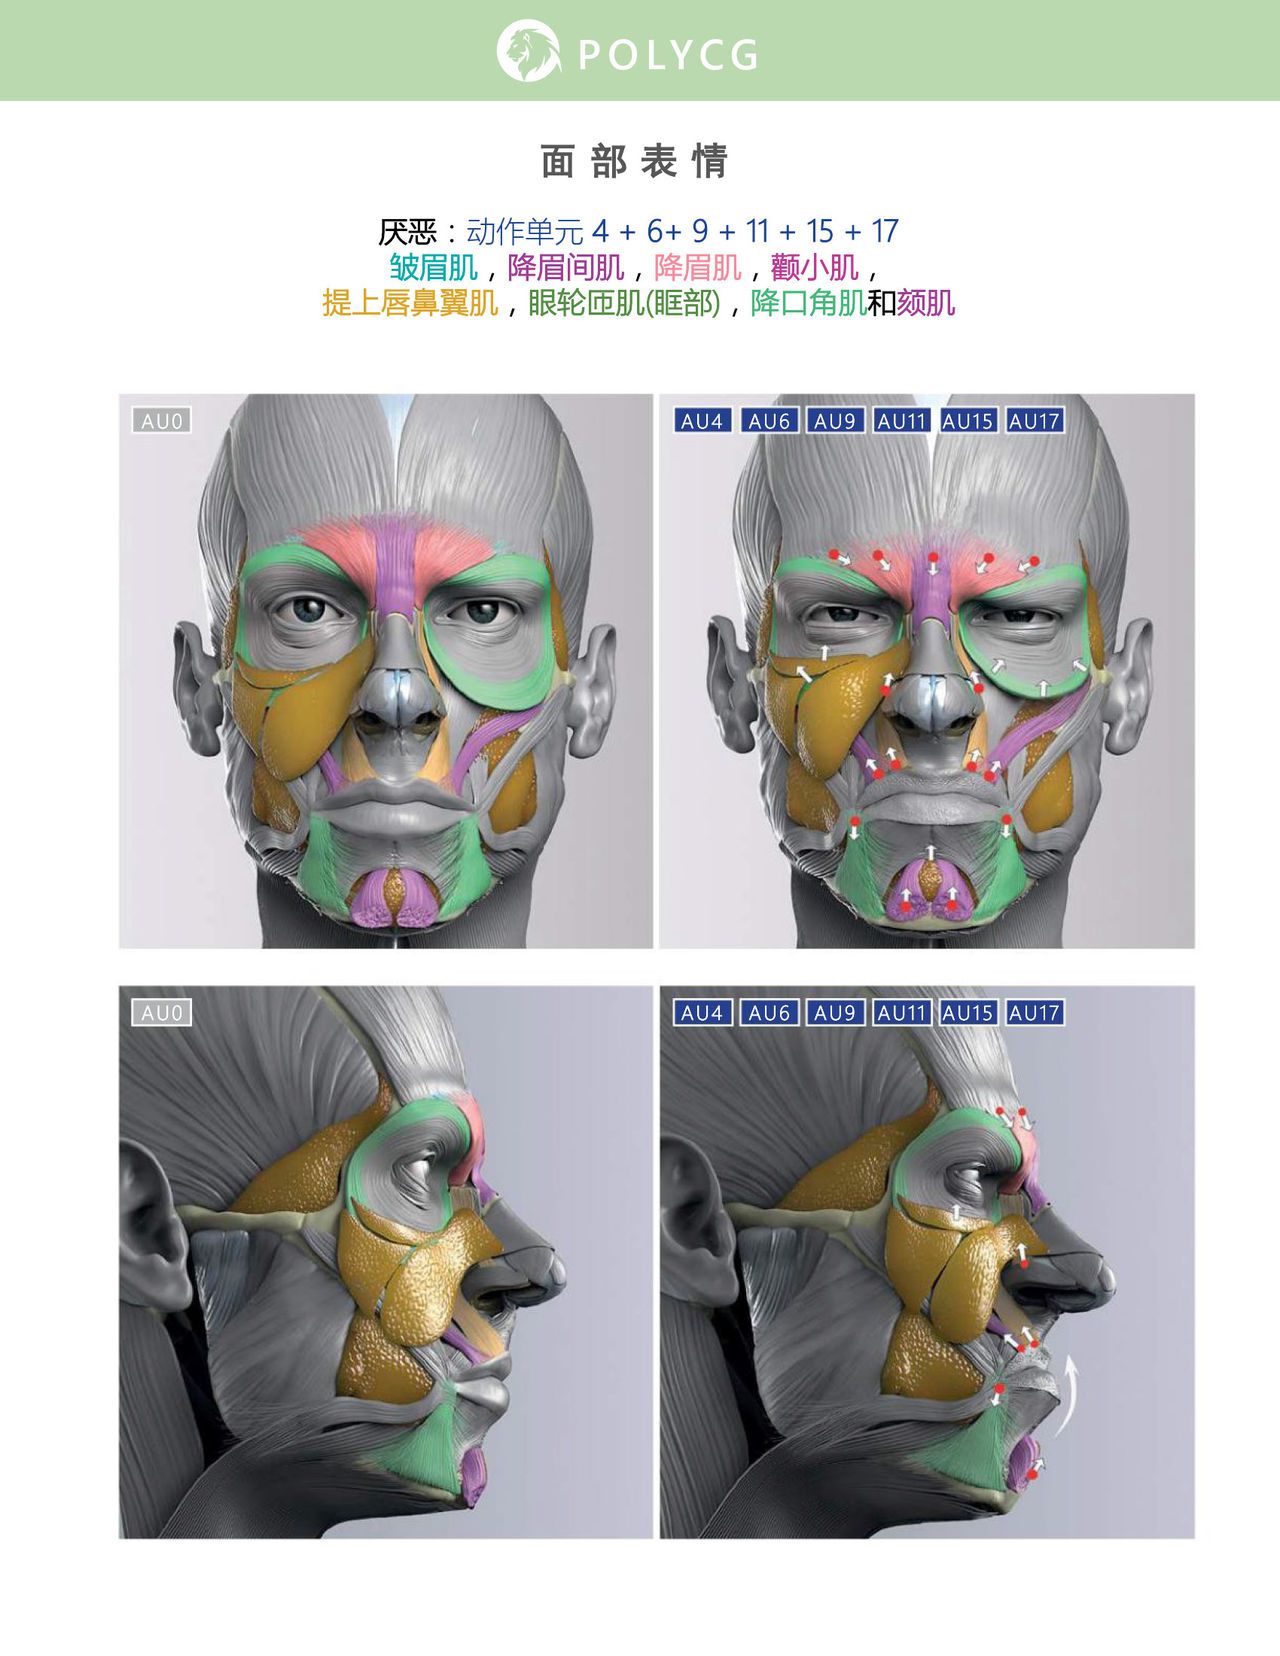 Uldis Zarins-Anatomy of Facial Expression-Exonicus [Chinese] 面部表情艺用解剖 [中文版] 173